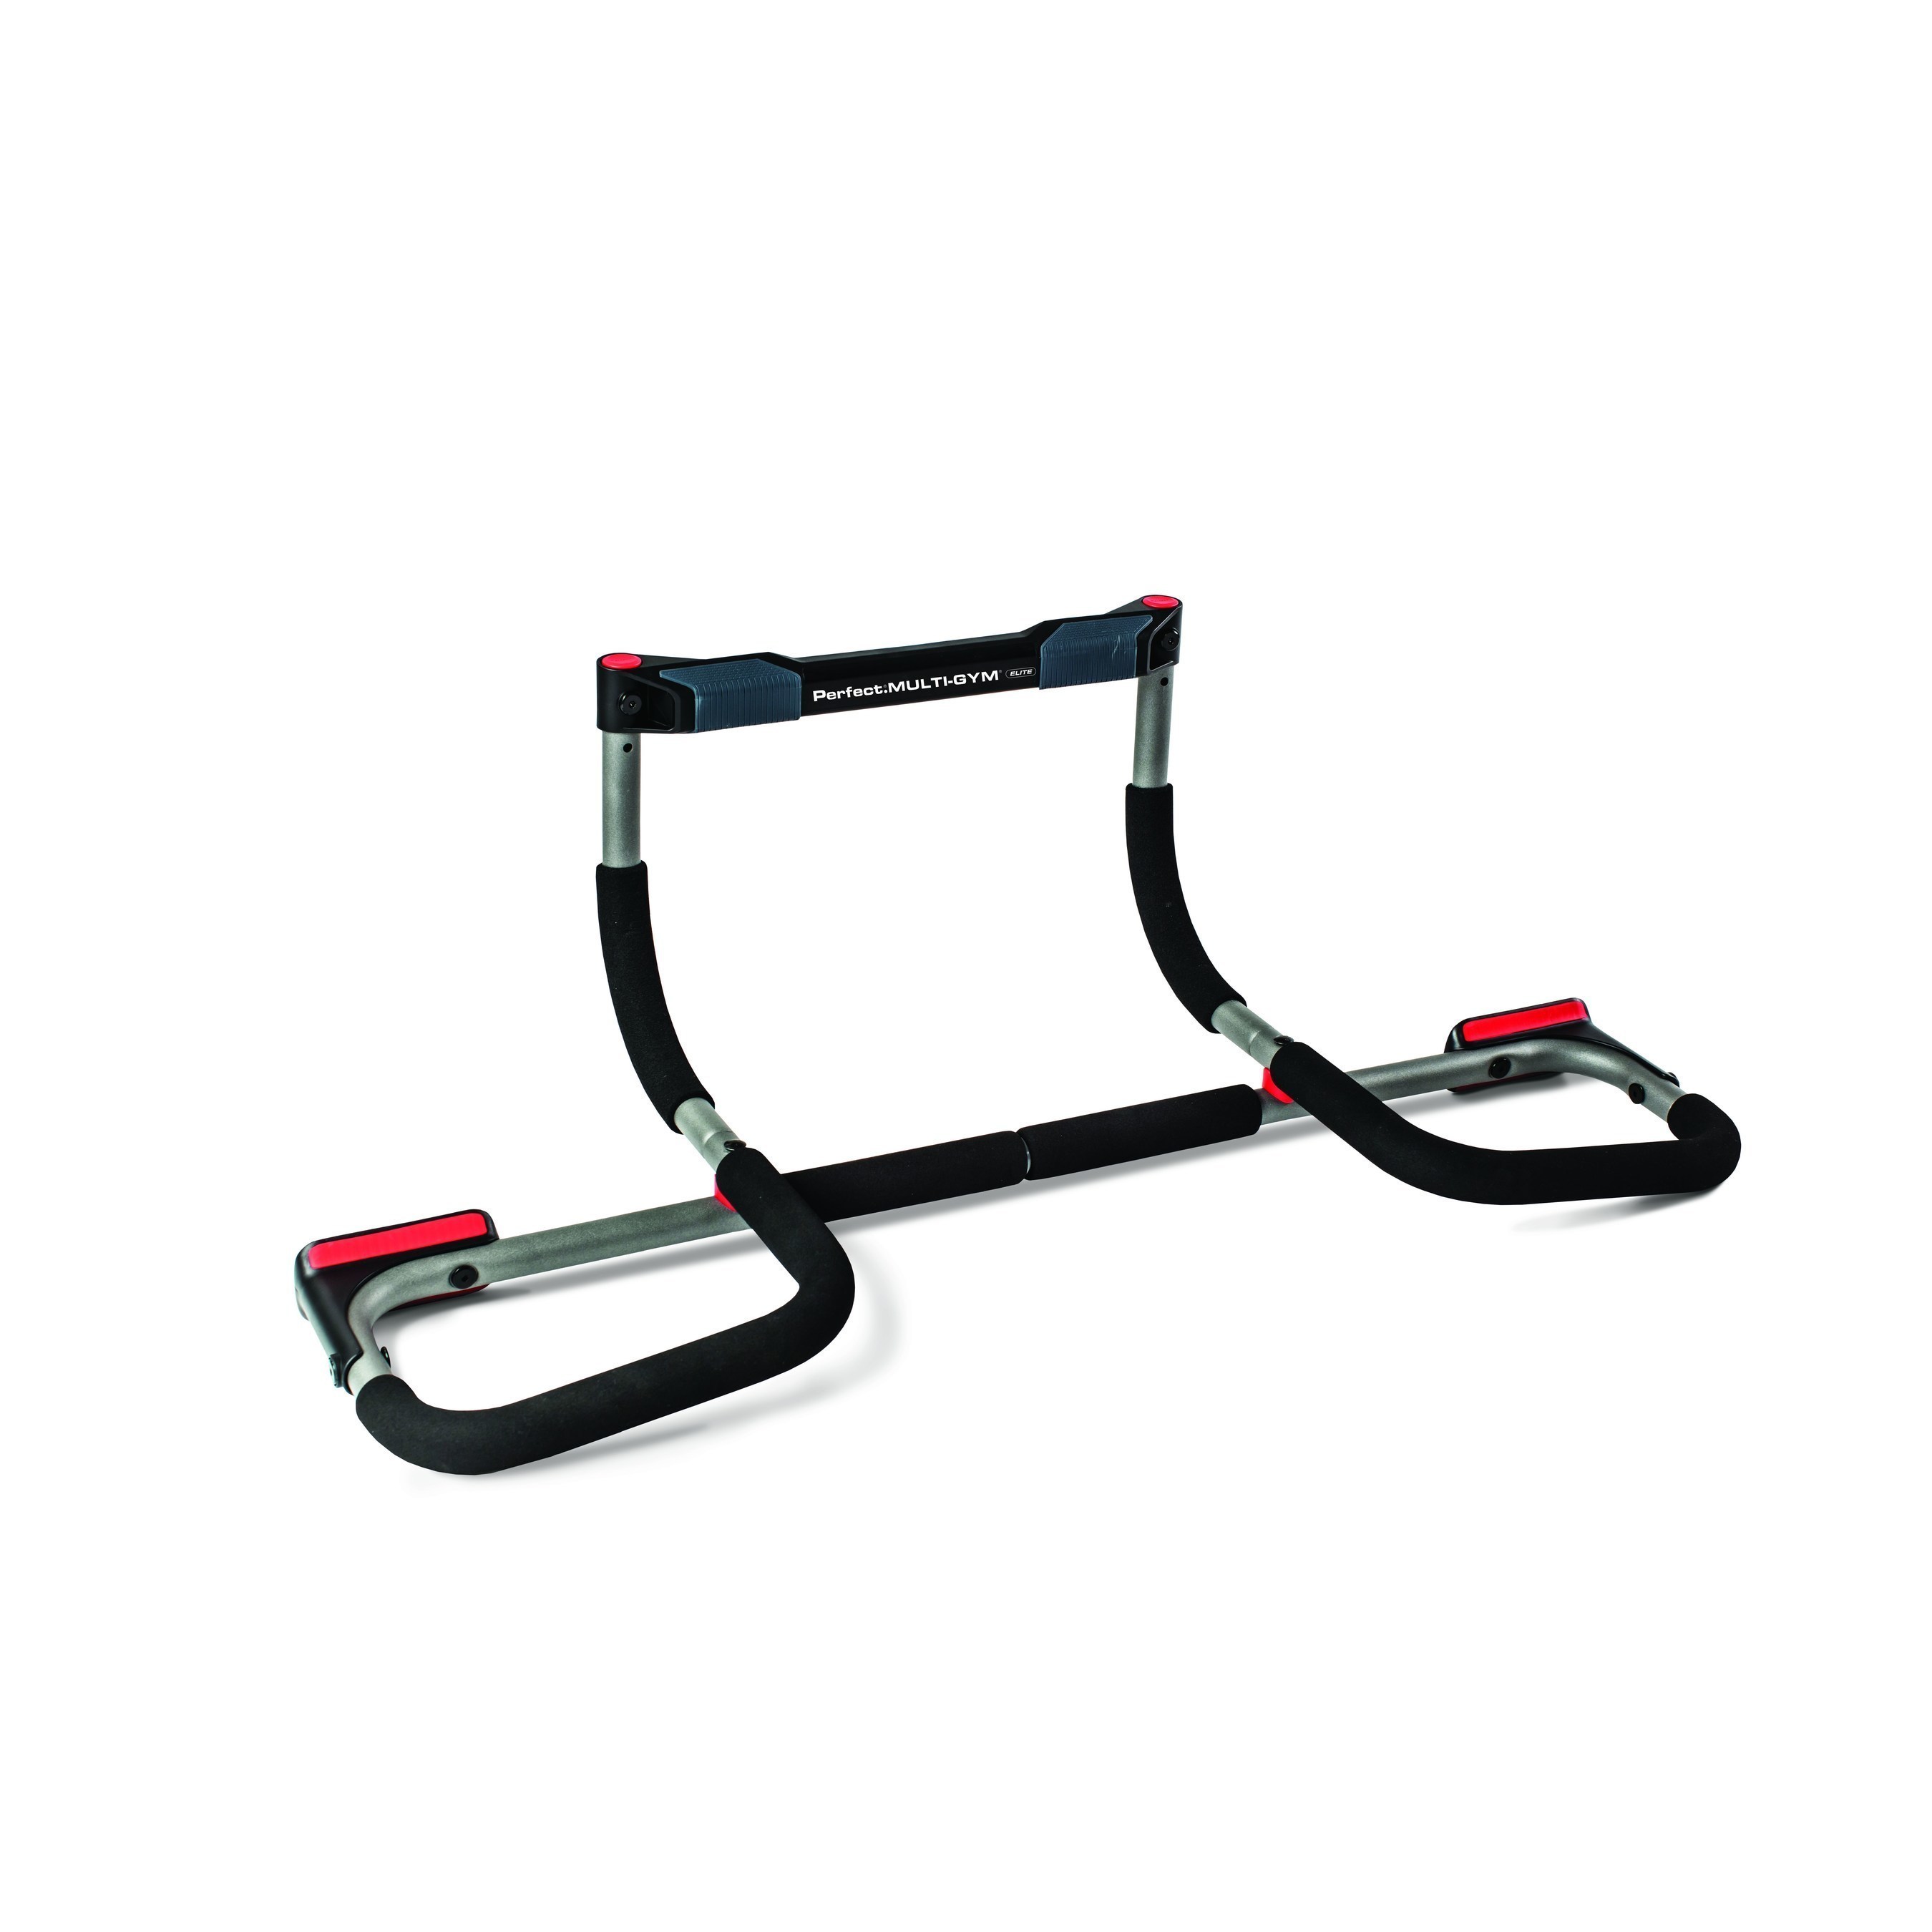 The Multi-Gym Elite provides users comfortable ergonomic handles to perform three kinds of pullups (wide, close and hammer grip) and when flipped over, can be used for incline pushups, sit-ups and dips. This single-tool system efficiently works key muscle groups and increases the impact of users' exercise regimens, targeting arm, core and back zones.